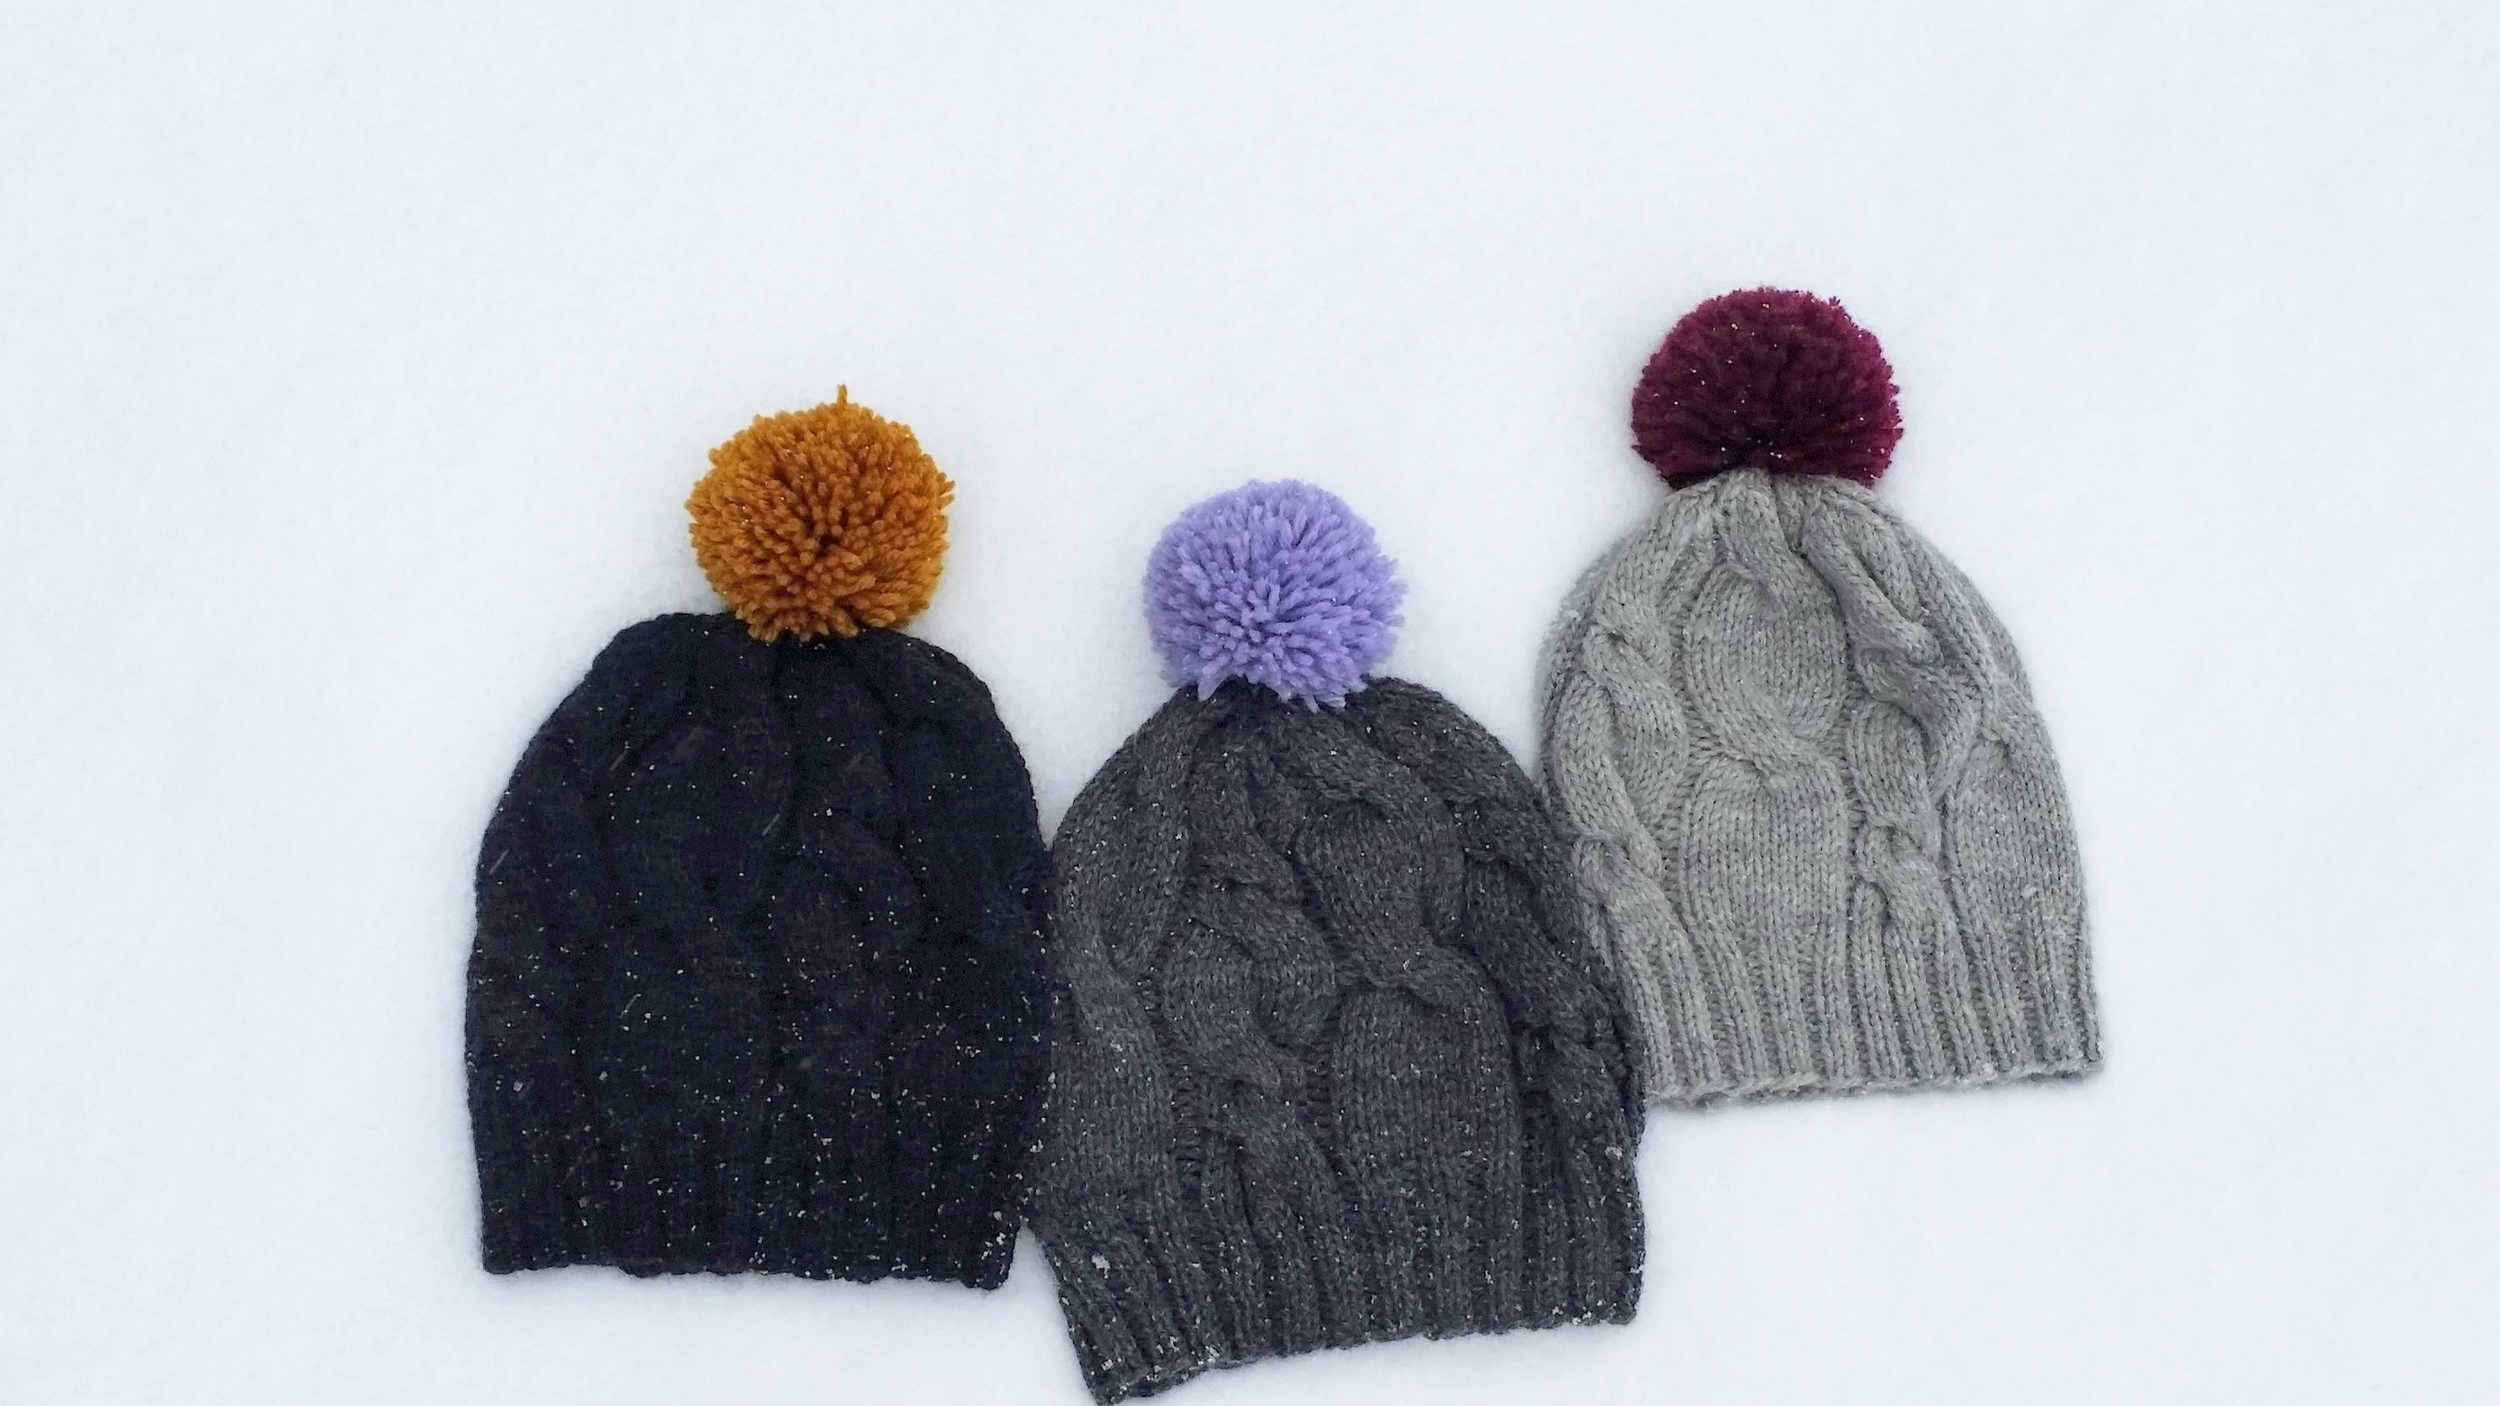 Three grey hats with alternating knit cables and colourful pom-poms lie in the snow.